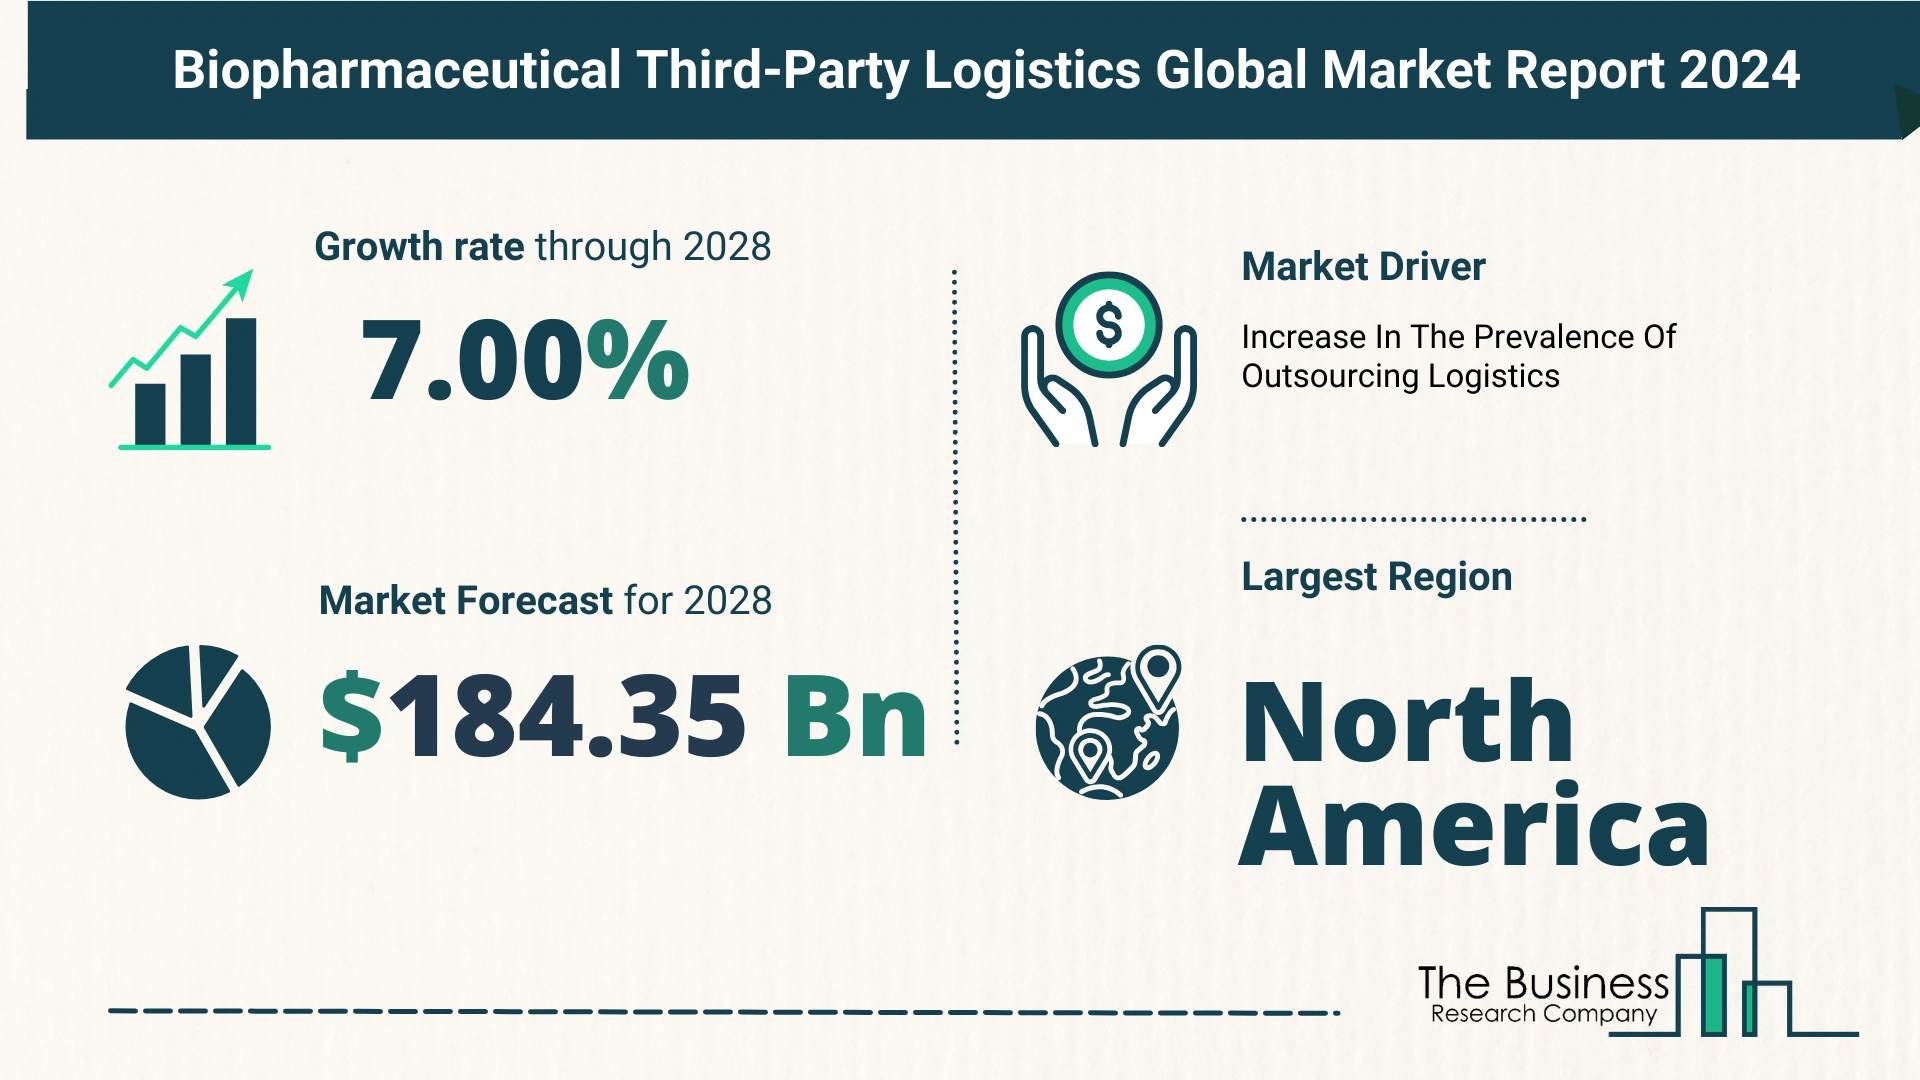 How Is The Biopharmaceutical Third-Party Logistics Market Expected To Grow Through 2024-2033